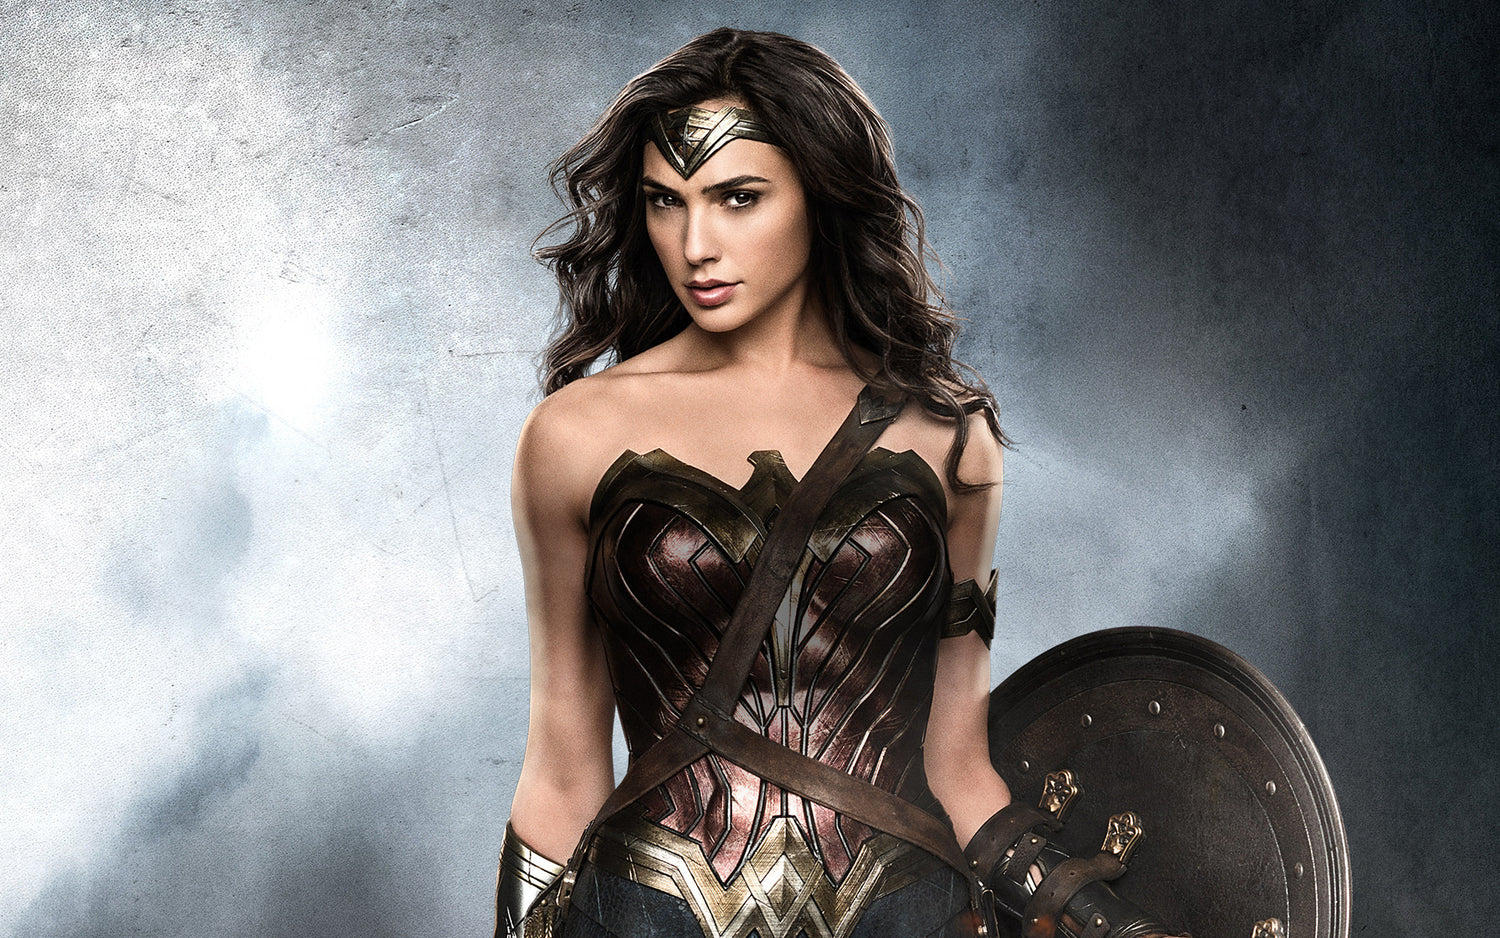 WHY GAL GADOT IS OUR GIRLCRUSH!